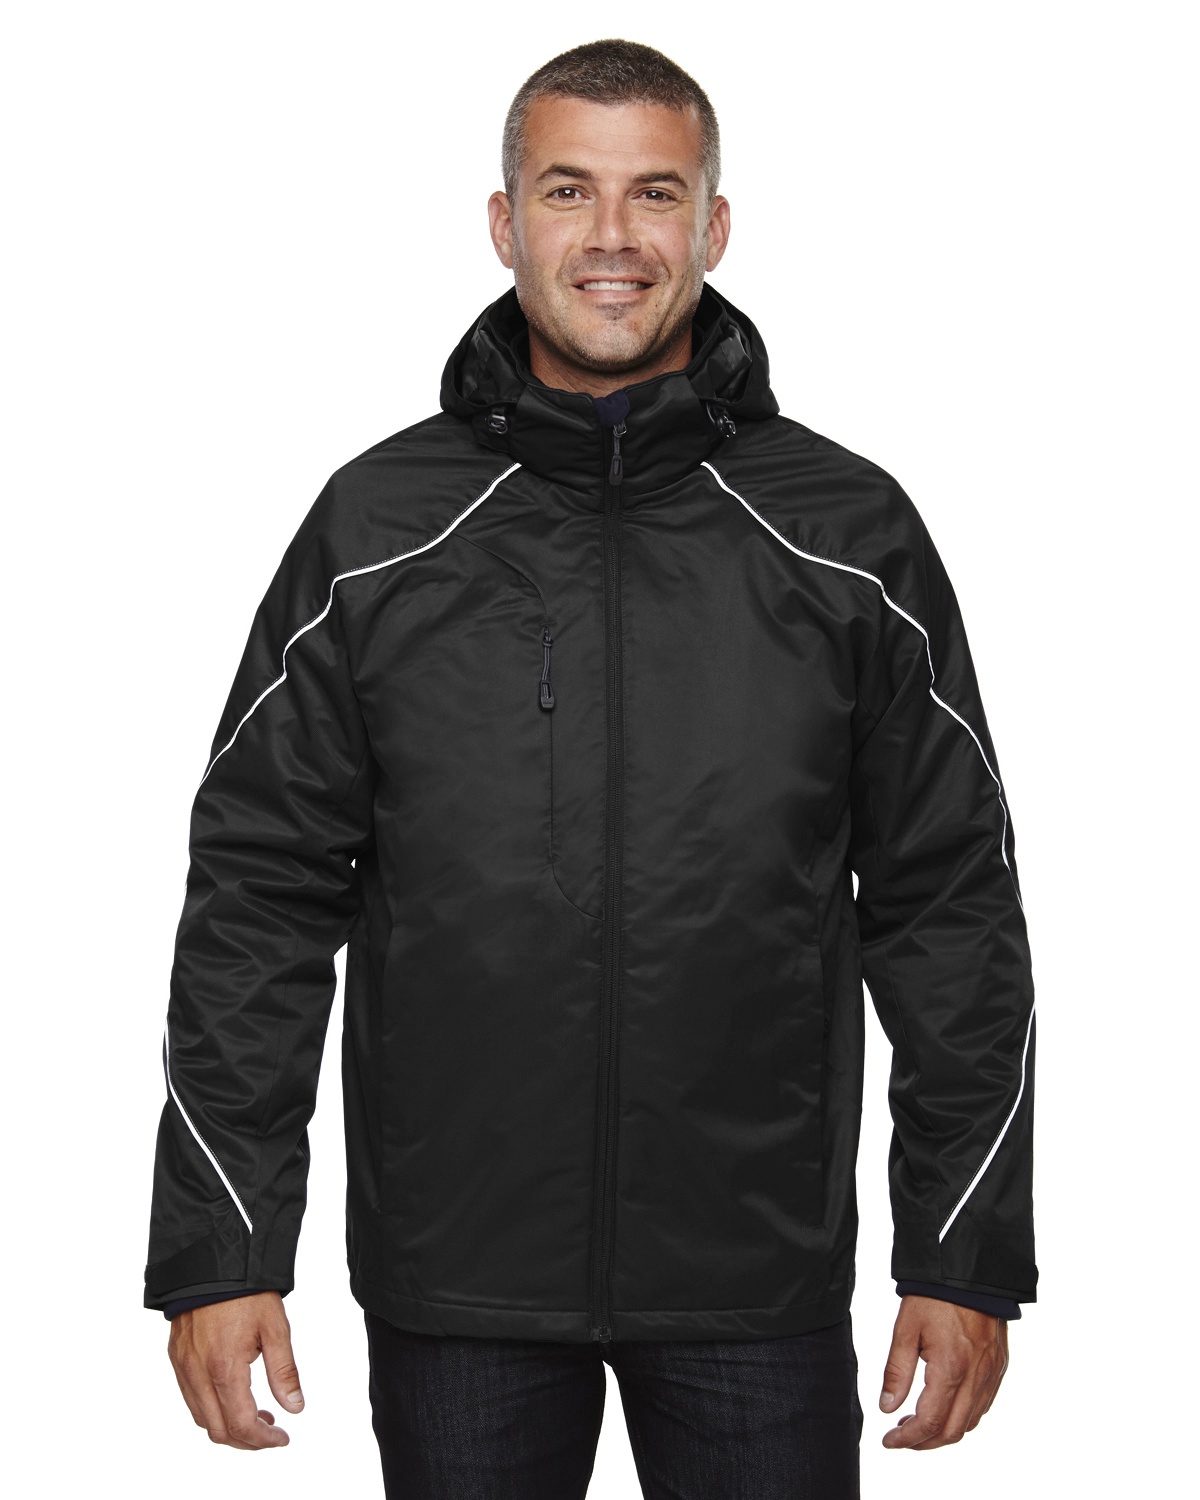 'Ash City - North End 88196 Men's Angle 3-in-1 Jacket with Bonded Fleece Liner'